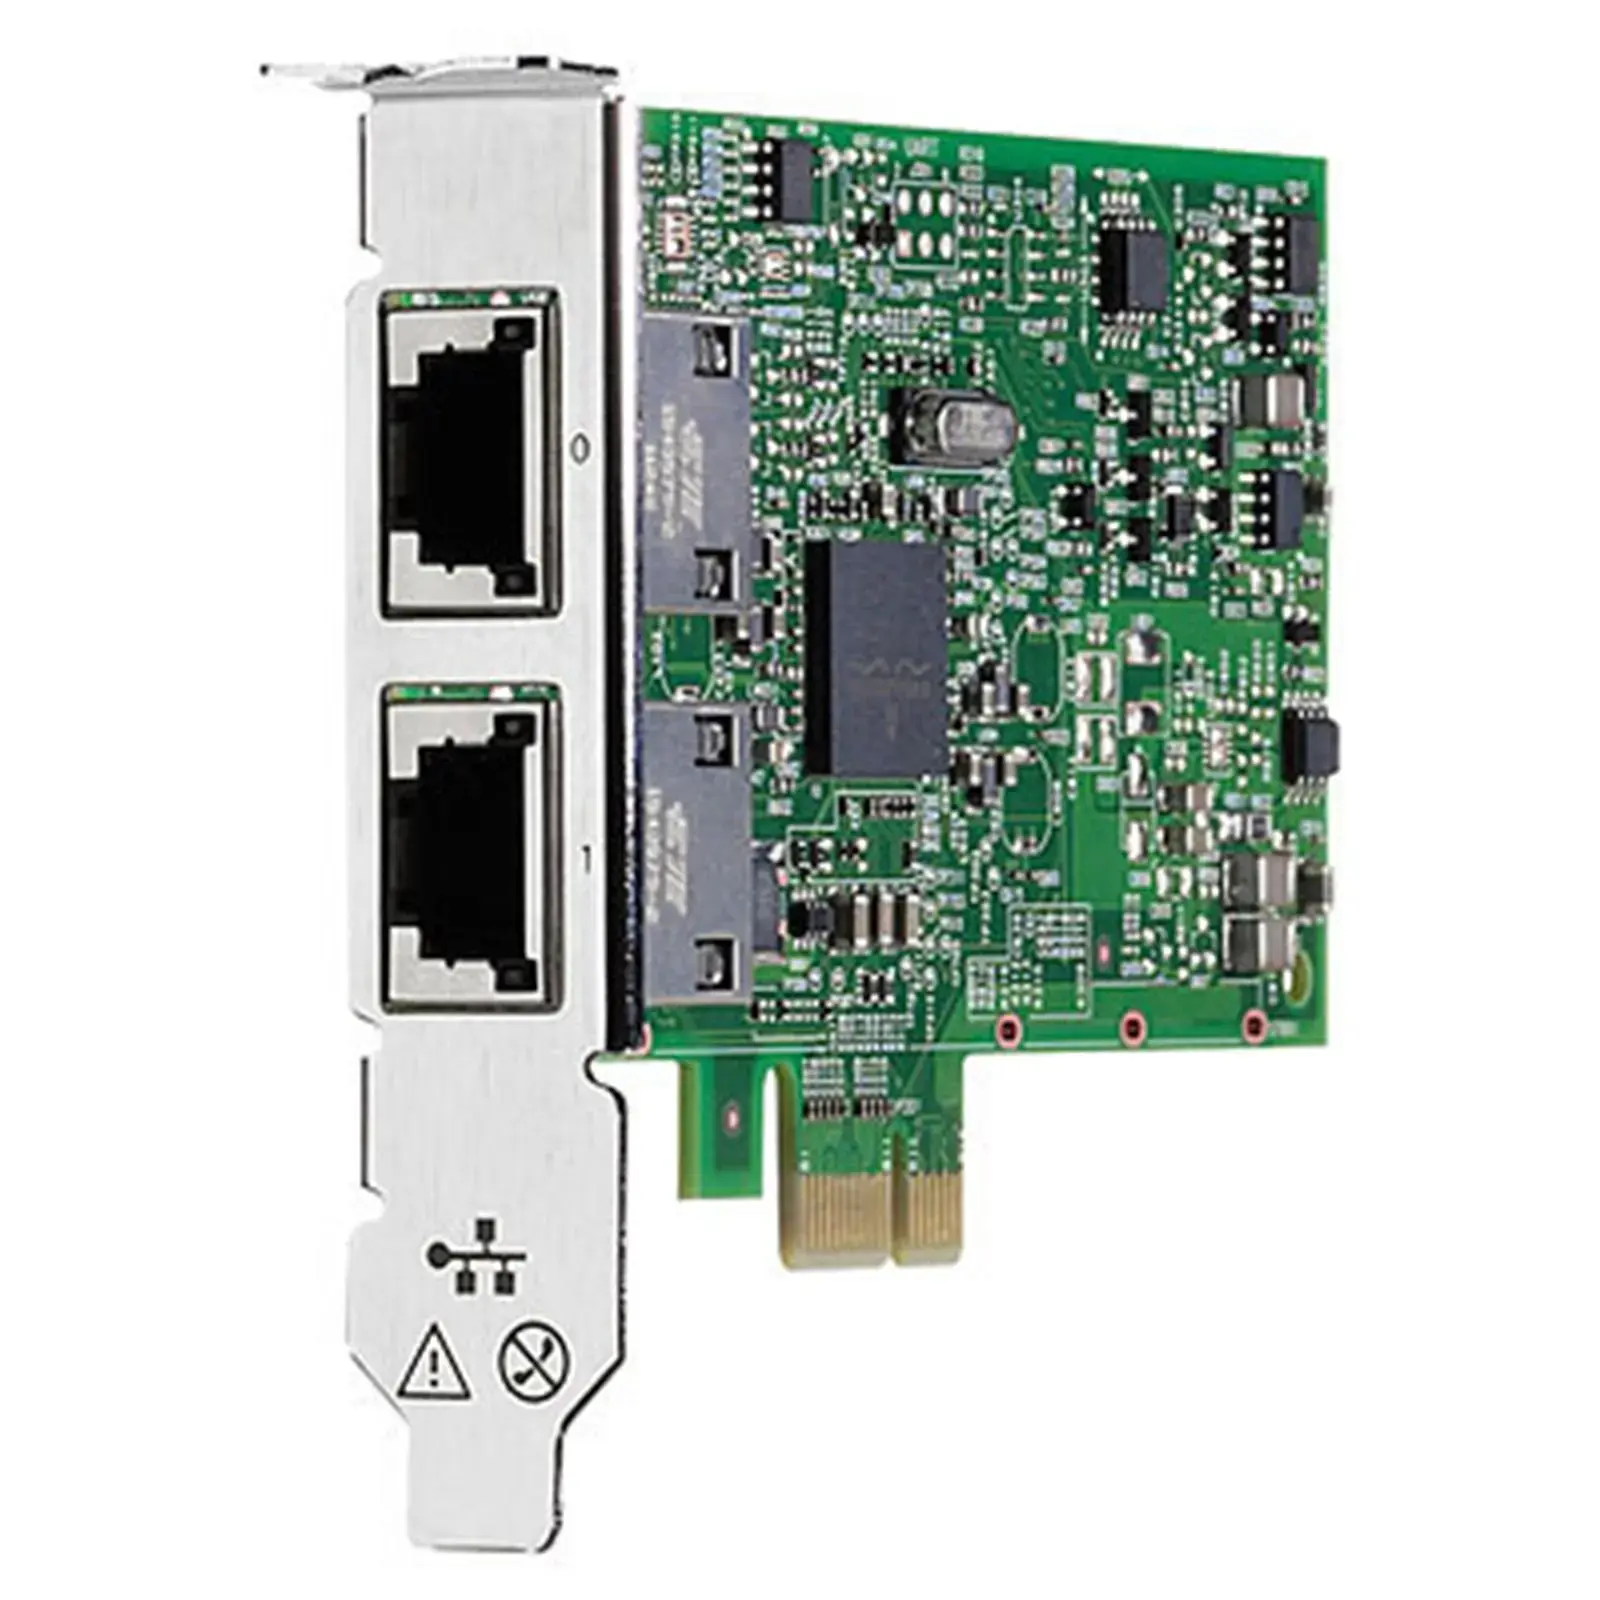 Q2P90A HP 1GB 2-Port 332T Ethernet Network Adapter